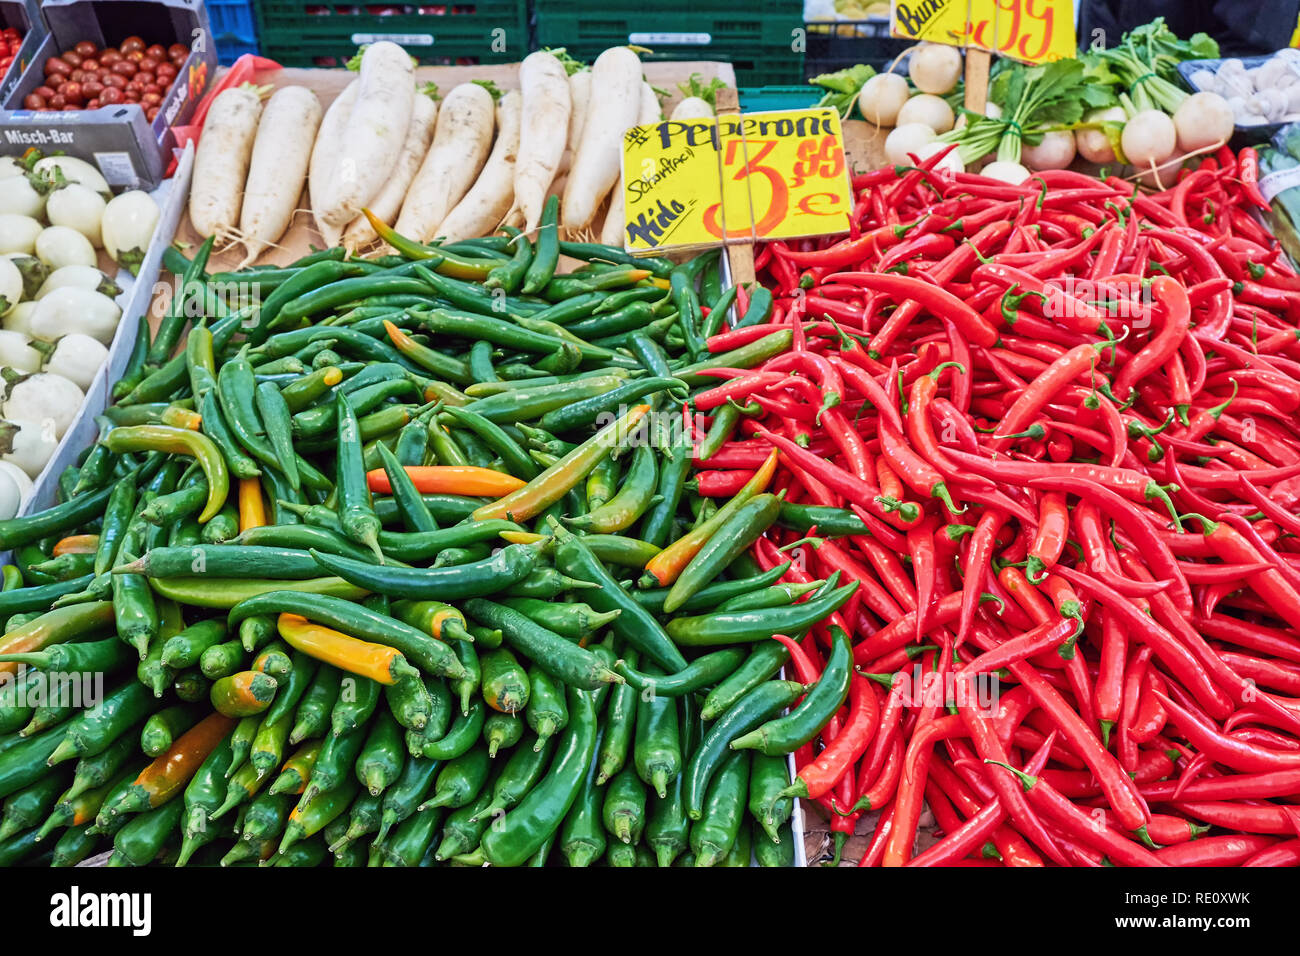 Green and red chilies for sale at a market Stock Photo